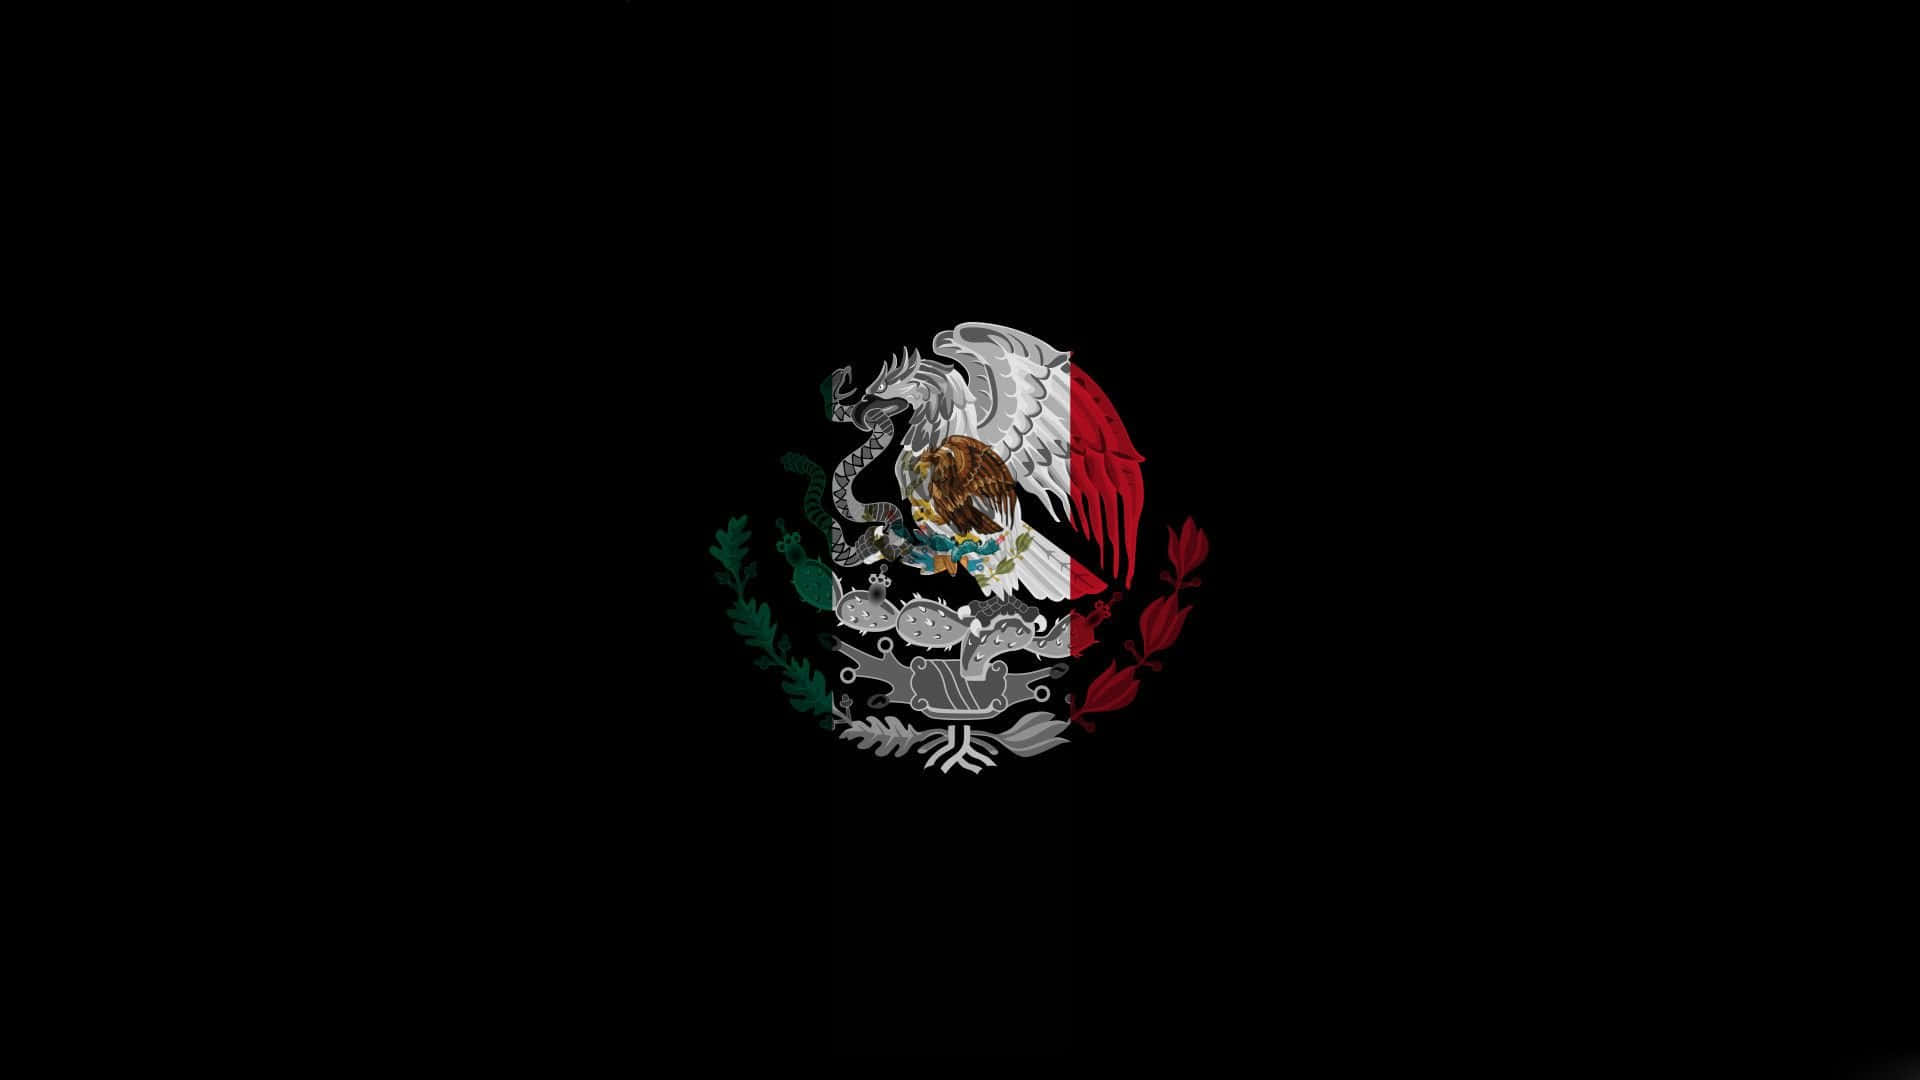 Enjoying a great win with Mexican Soccer 🇲🇽 Wallpaper